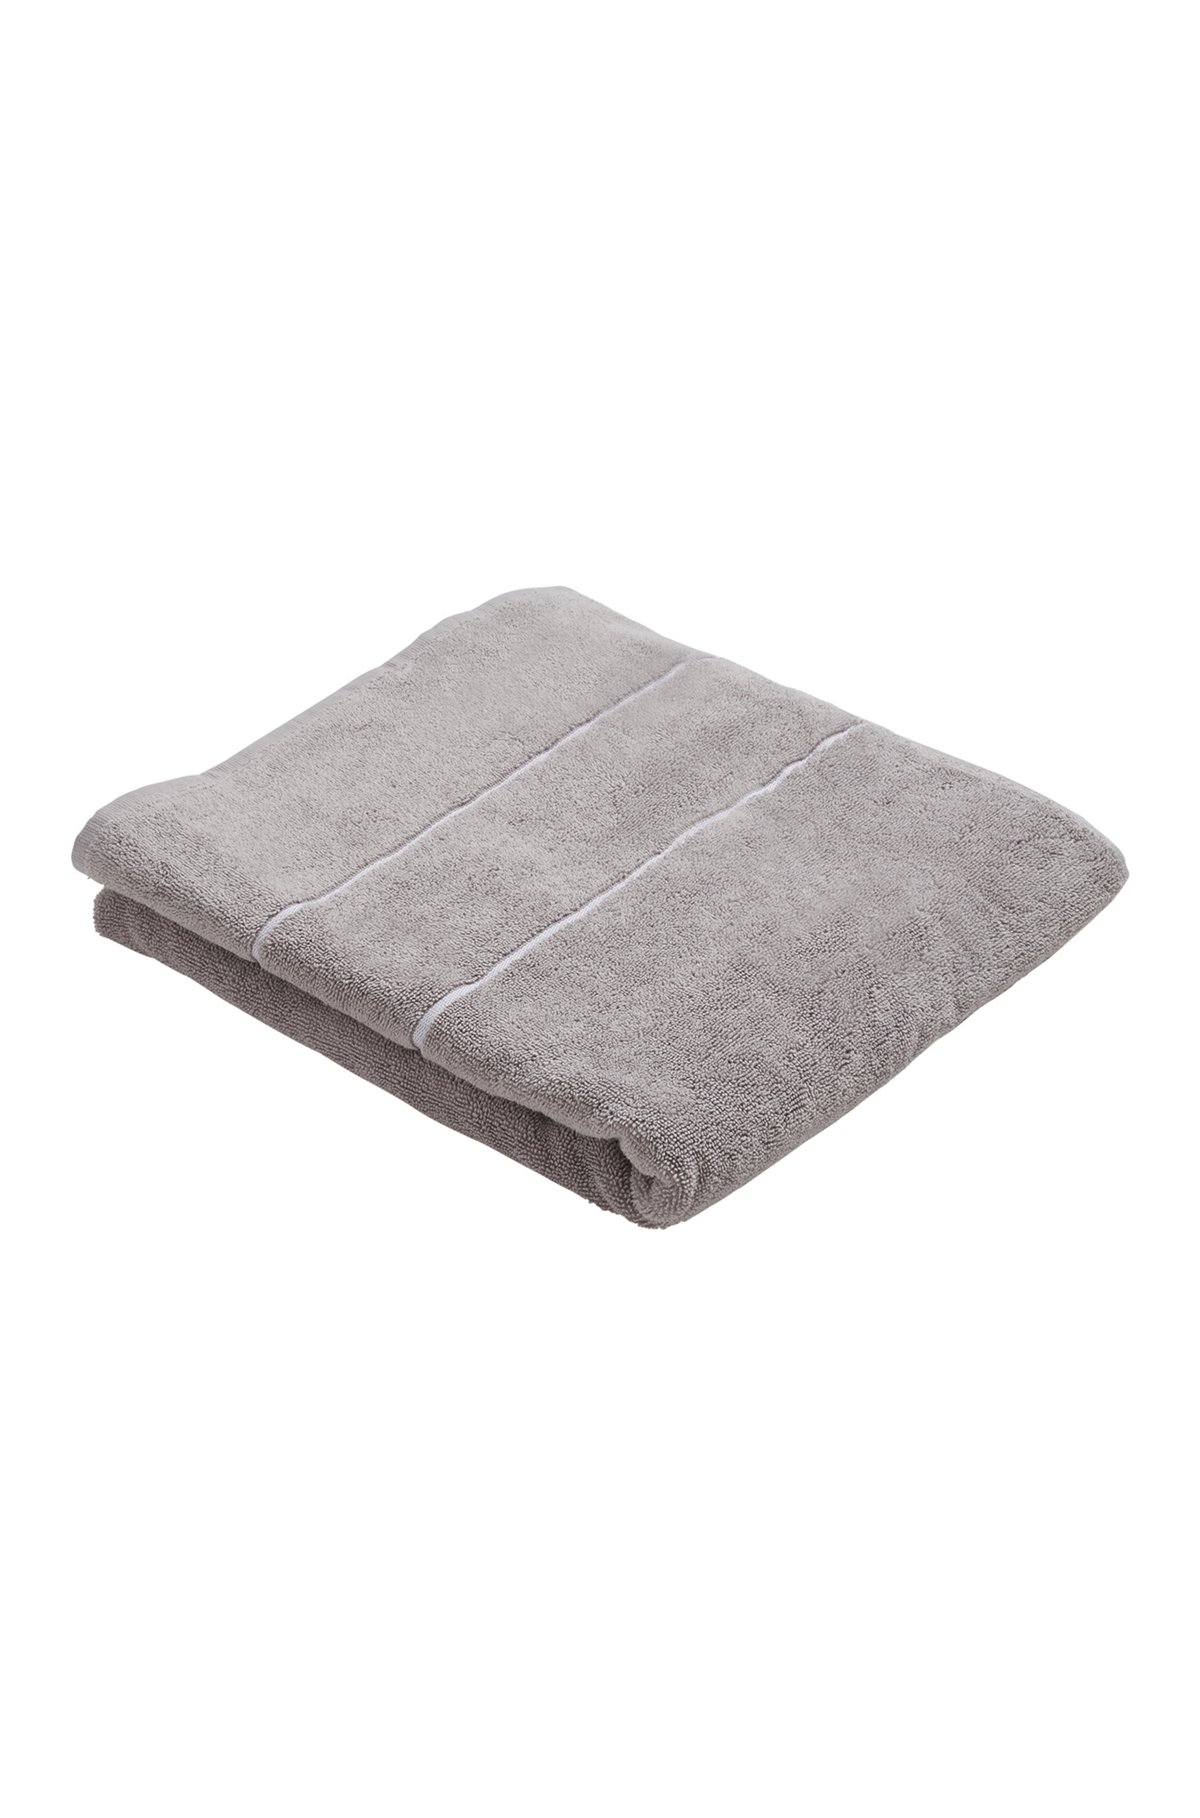 Cotton bath towel with white logo embroidery, Grey